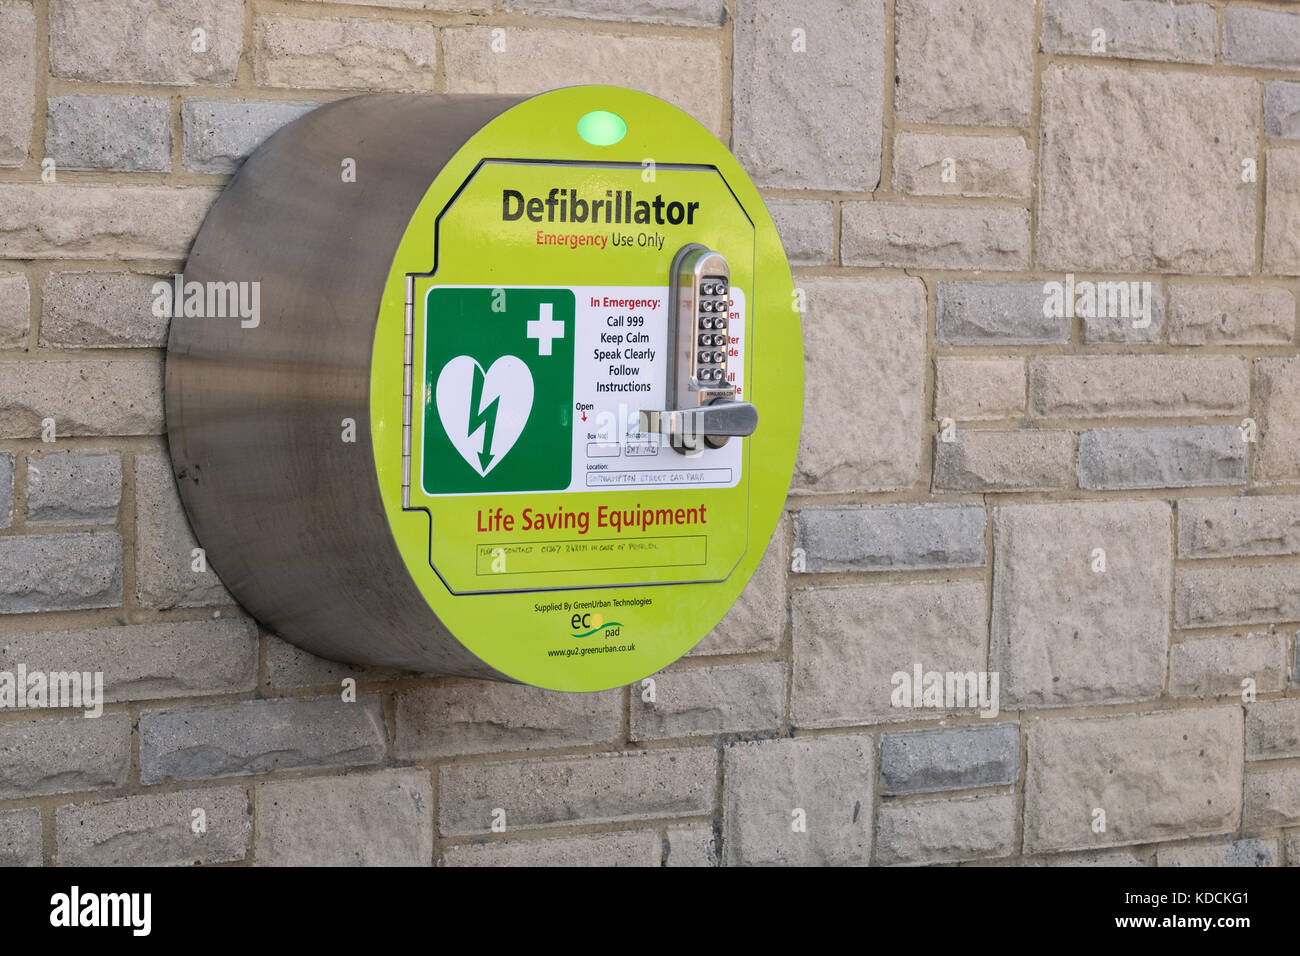 A life saving, cardiac defibrillator mounted to a wall in a public space for use by a member of the public in an emergency. Stock Photo